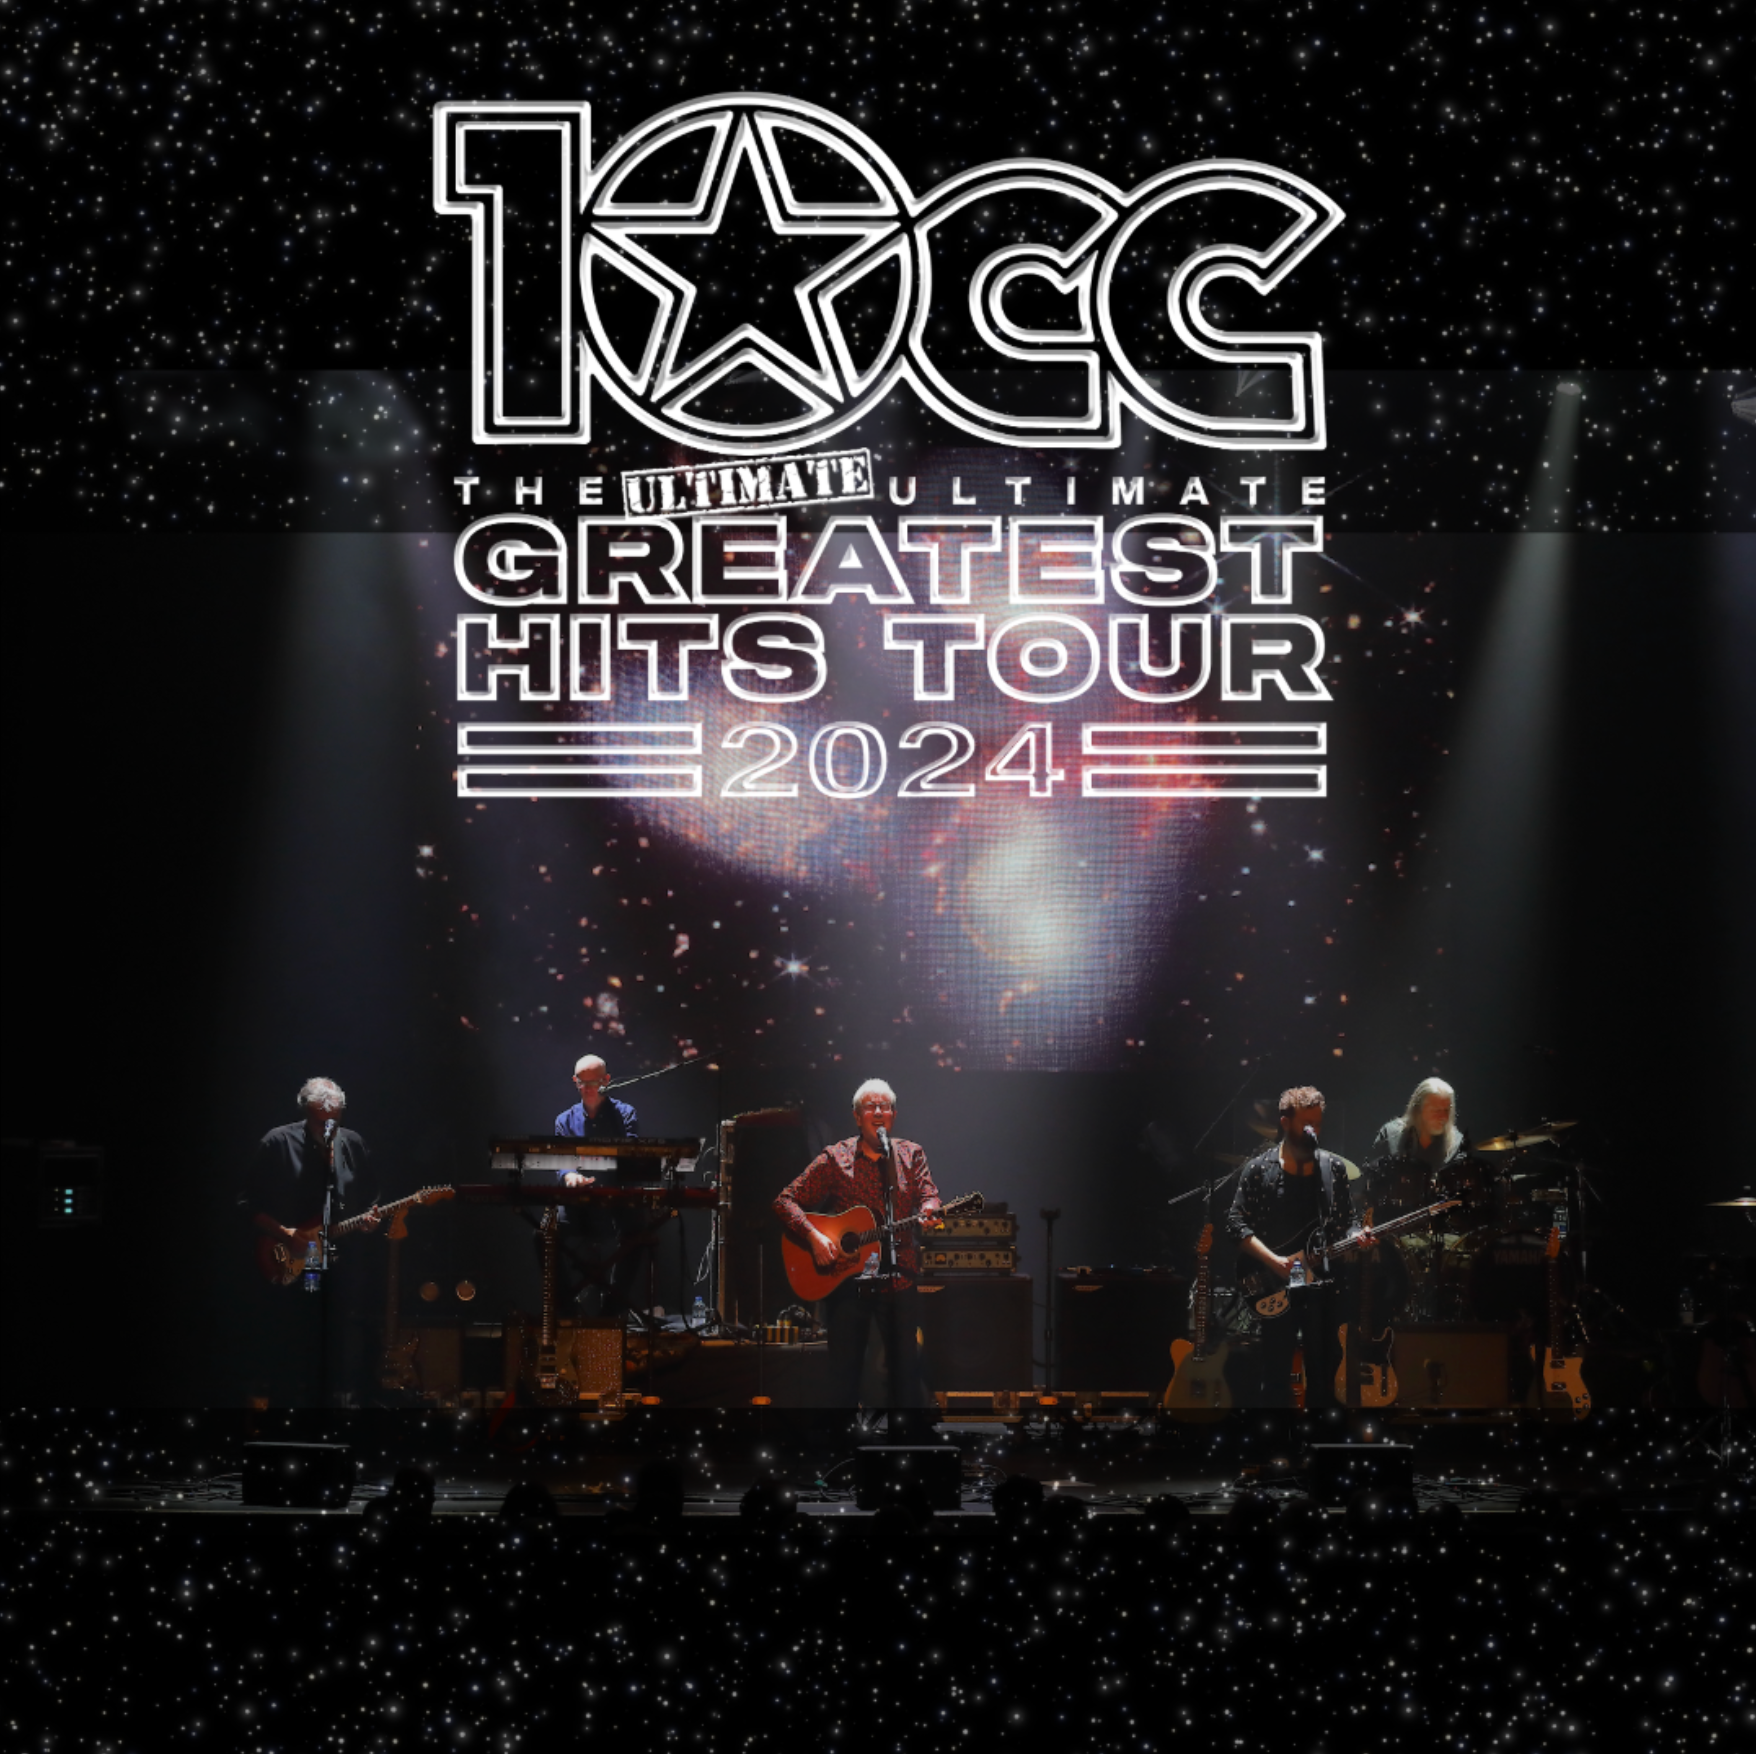 10cc ultimate greatest hits tour